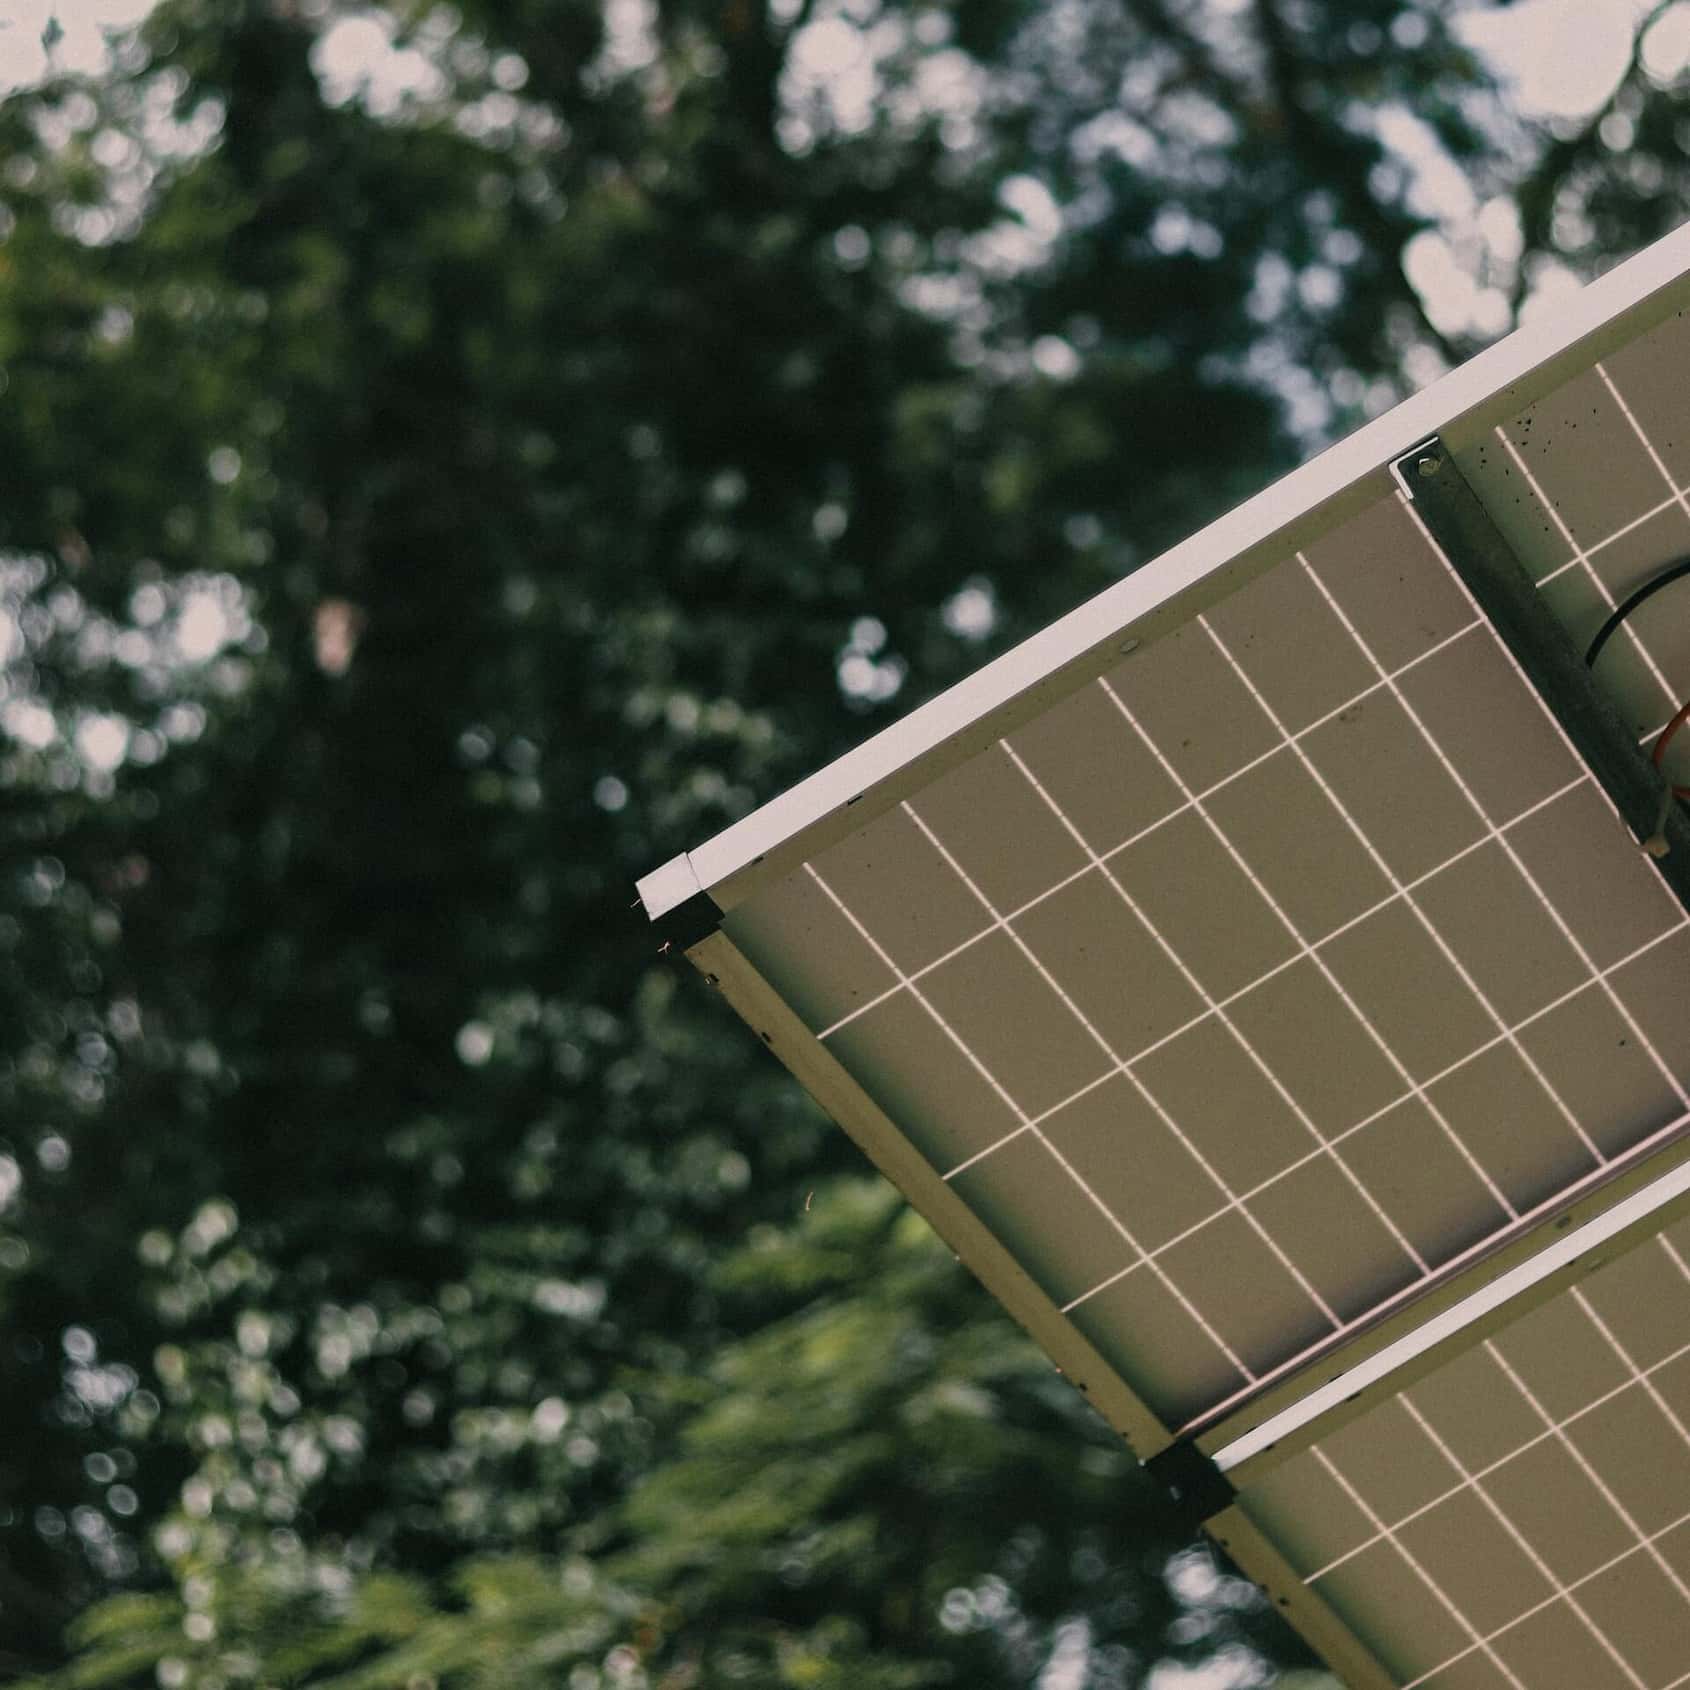 Solar Panels being used to generate solar energy in Singapore